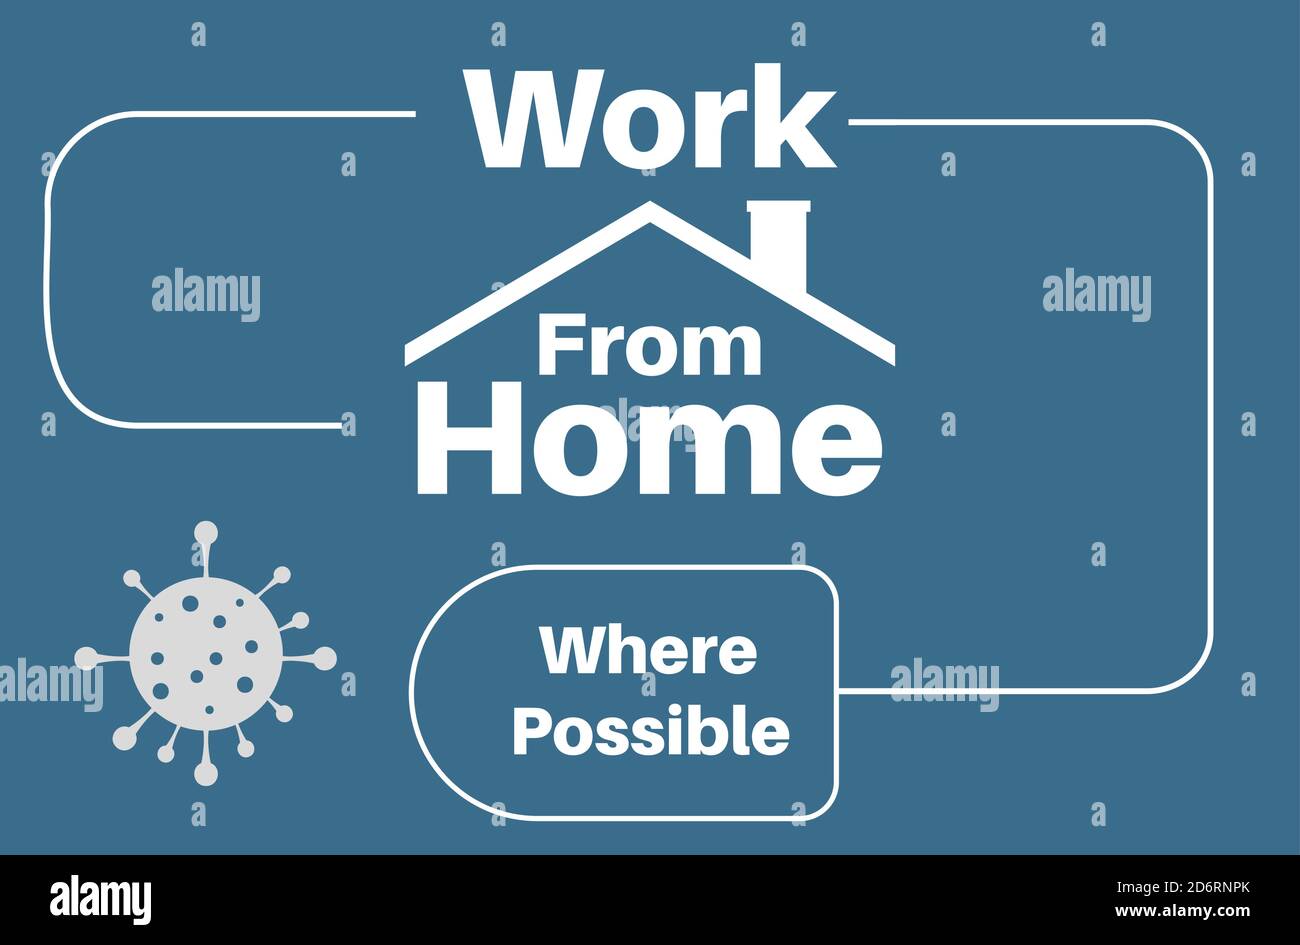 Work from home concept vector on a blue background Stock Vector